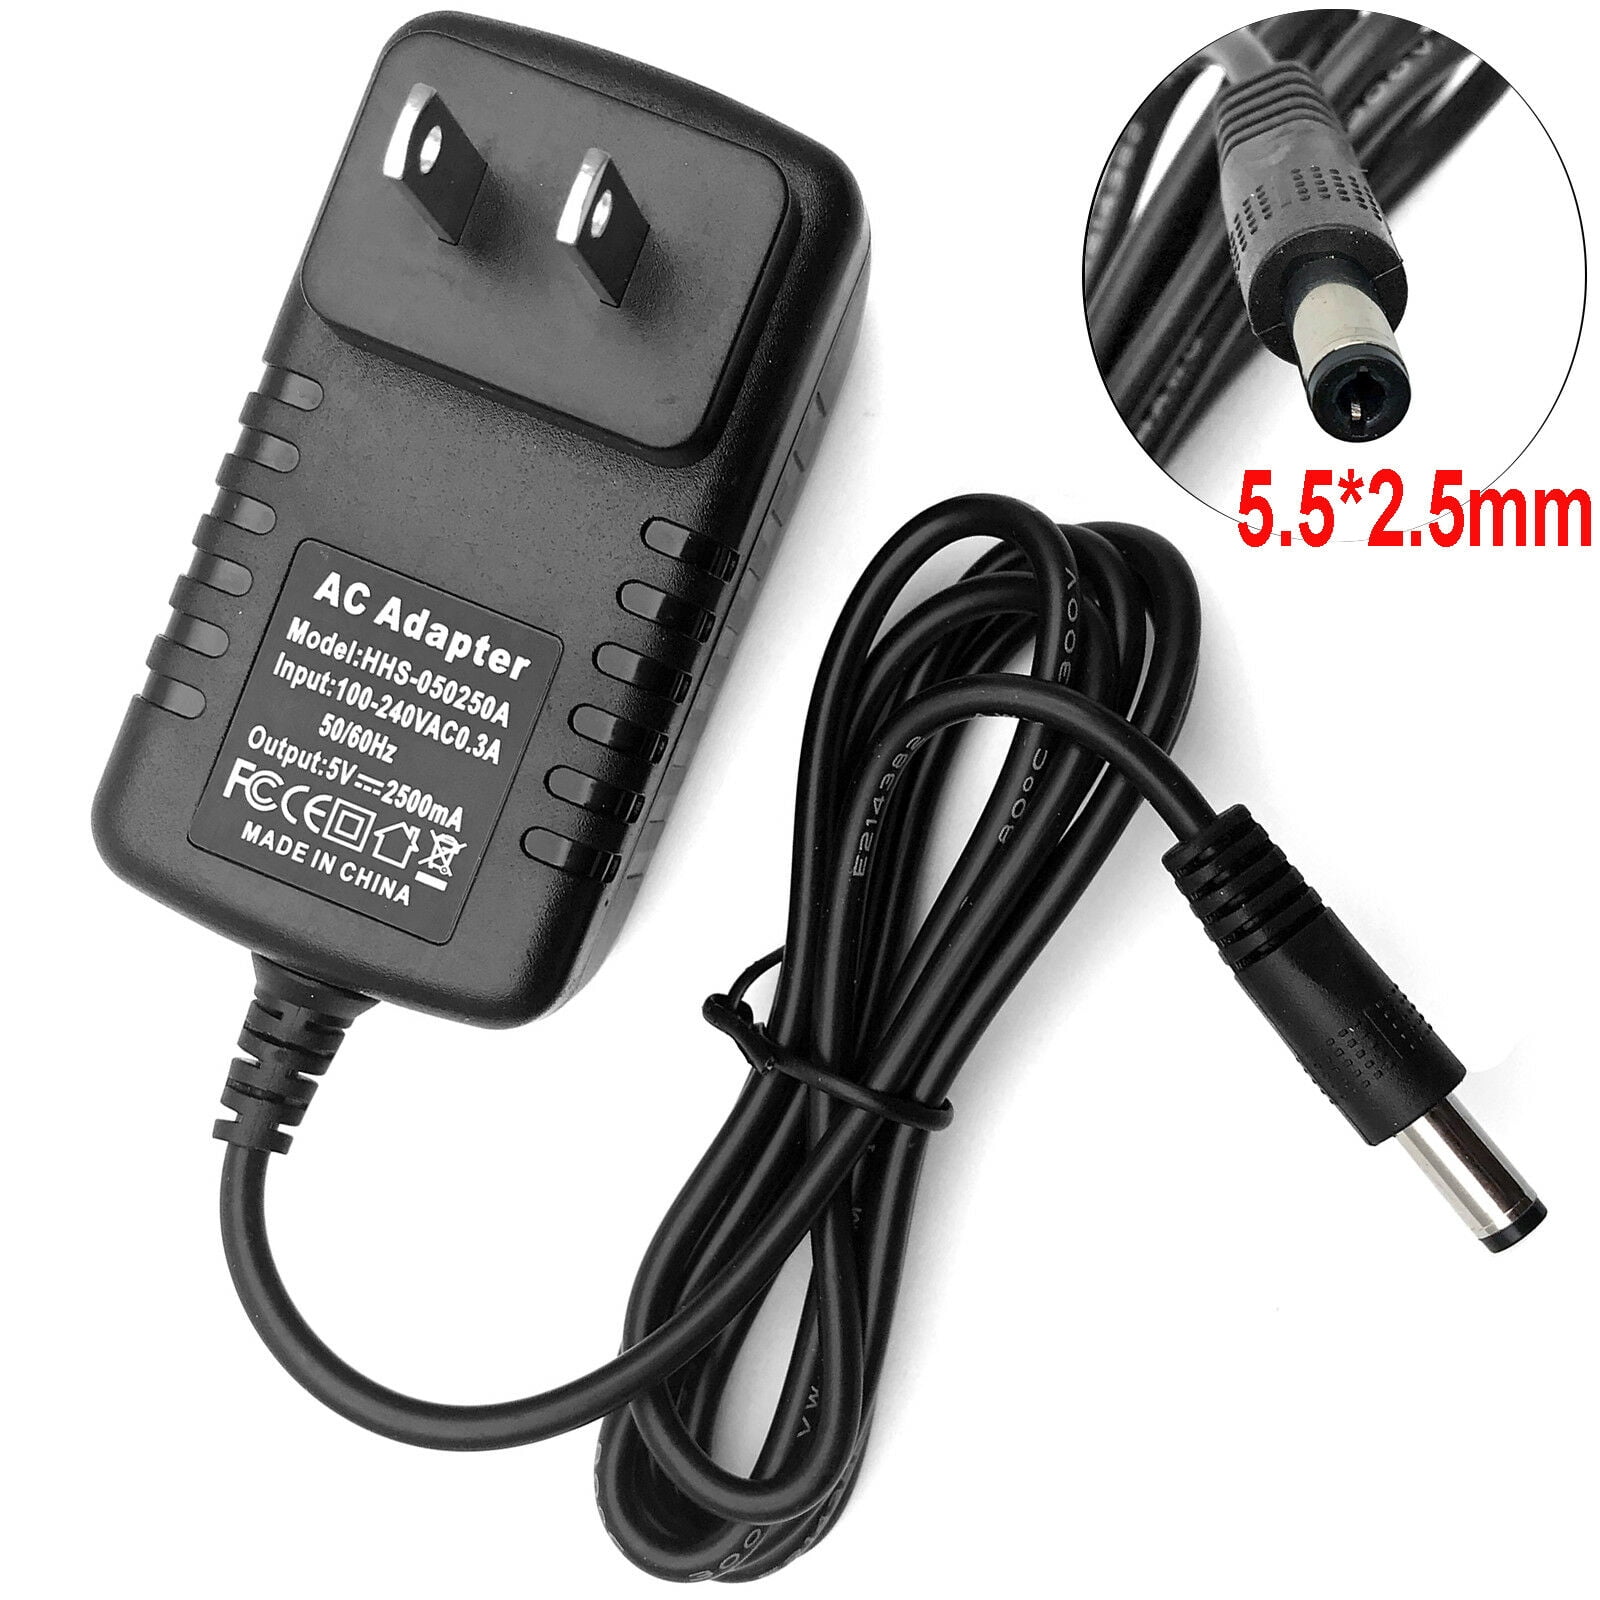 New AC DC Power Supply Adapter DC 5V 2.5A for D-Link Router 